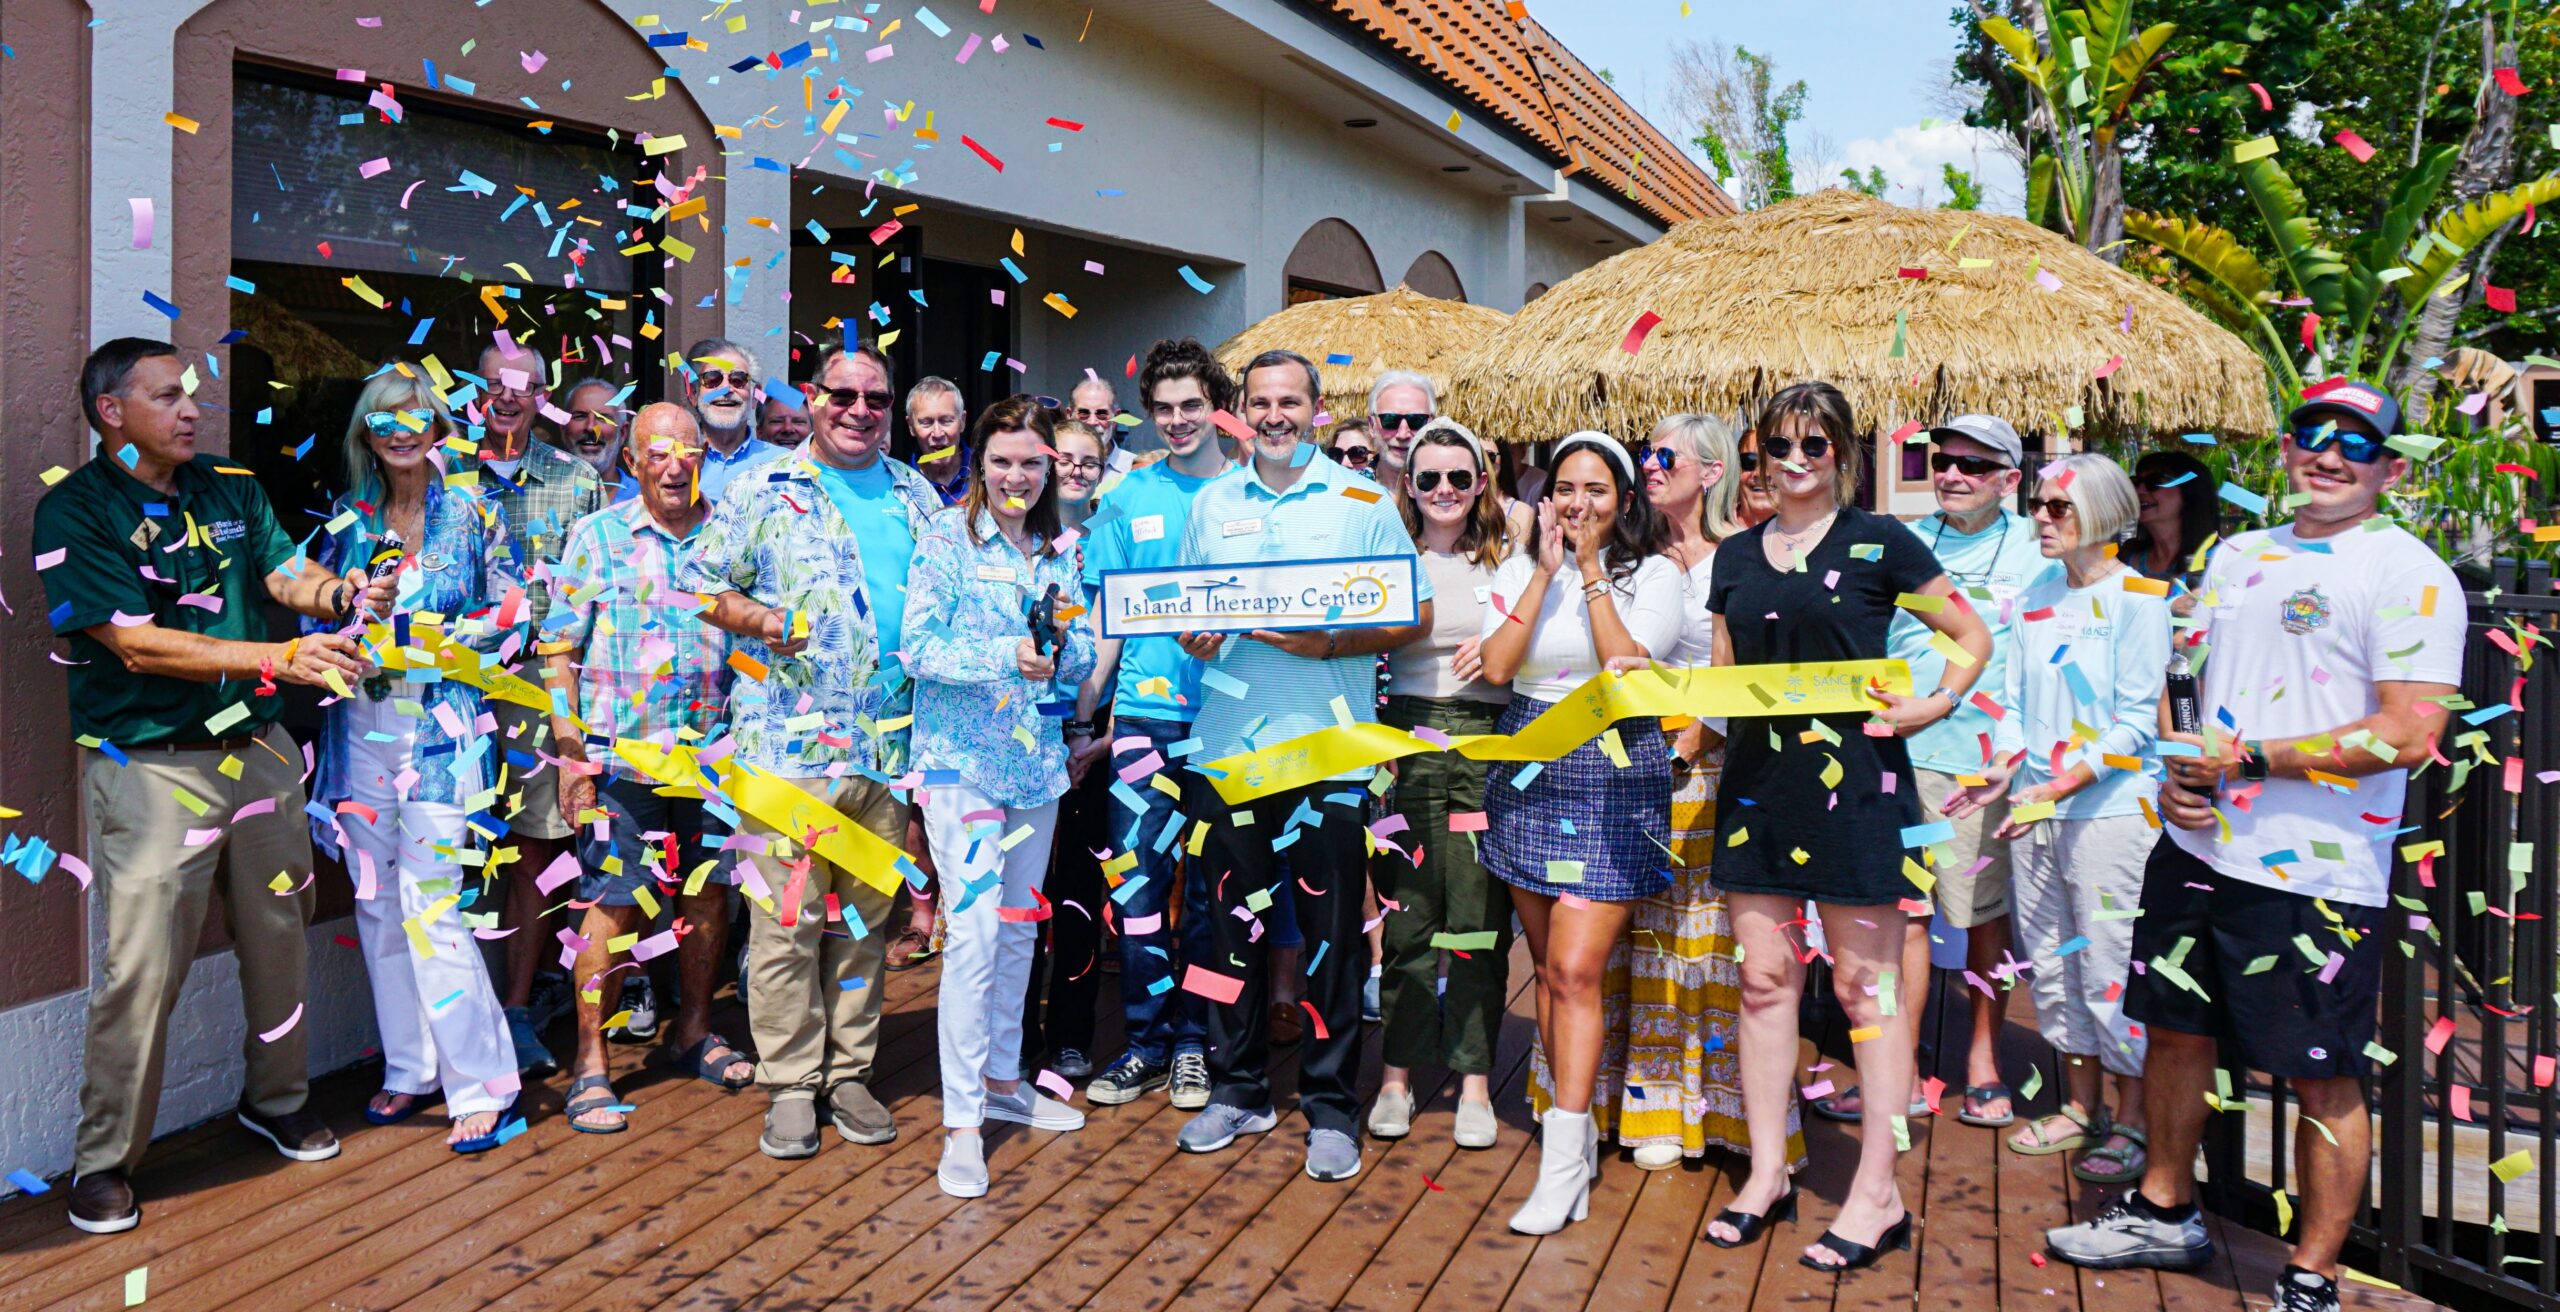 SanCap Chamber hails Island Therapy new location with ribbon-cutting